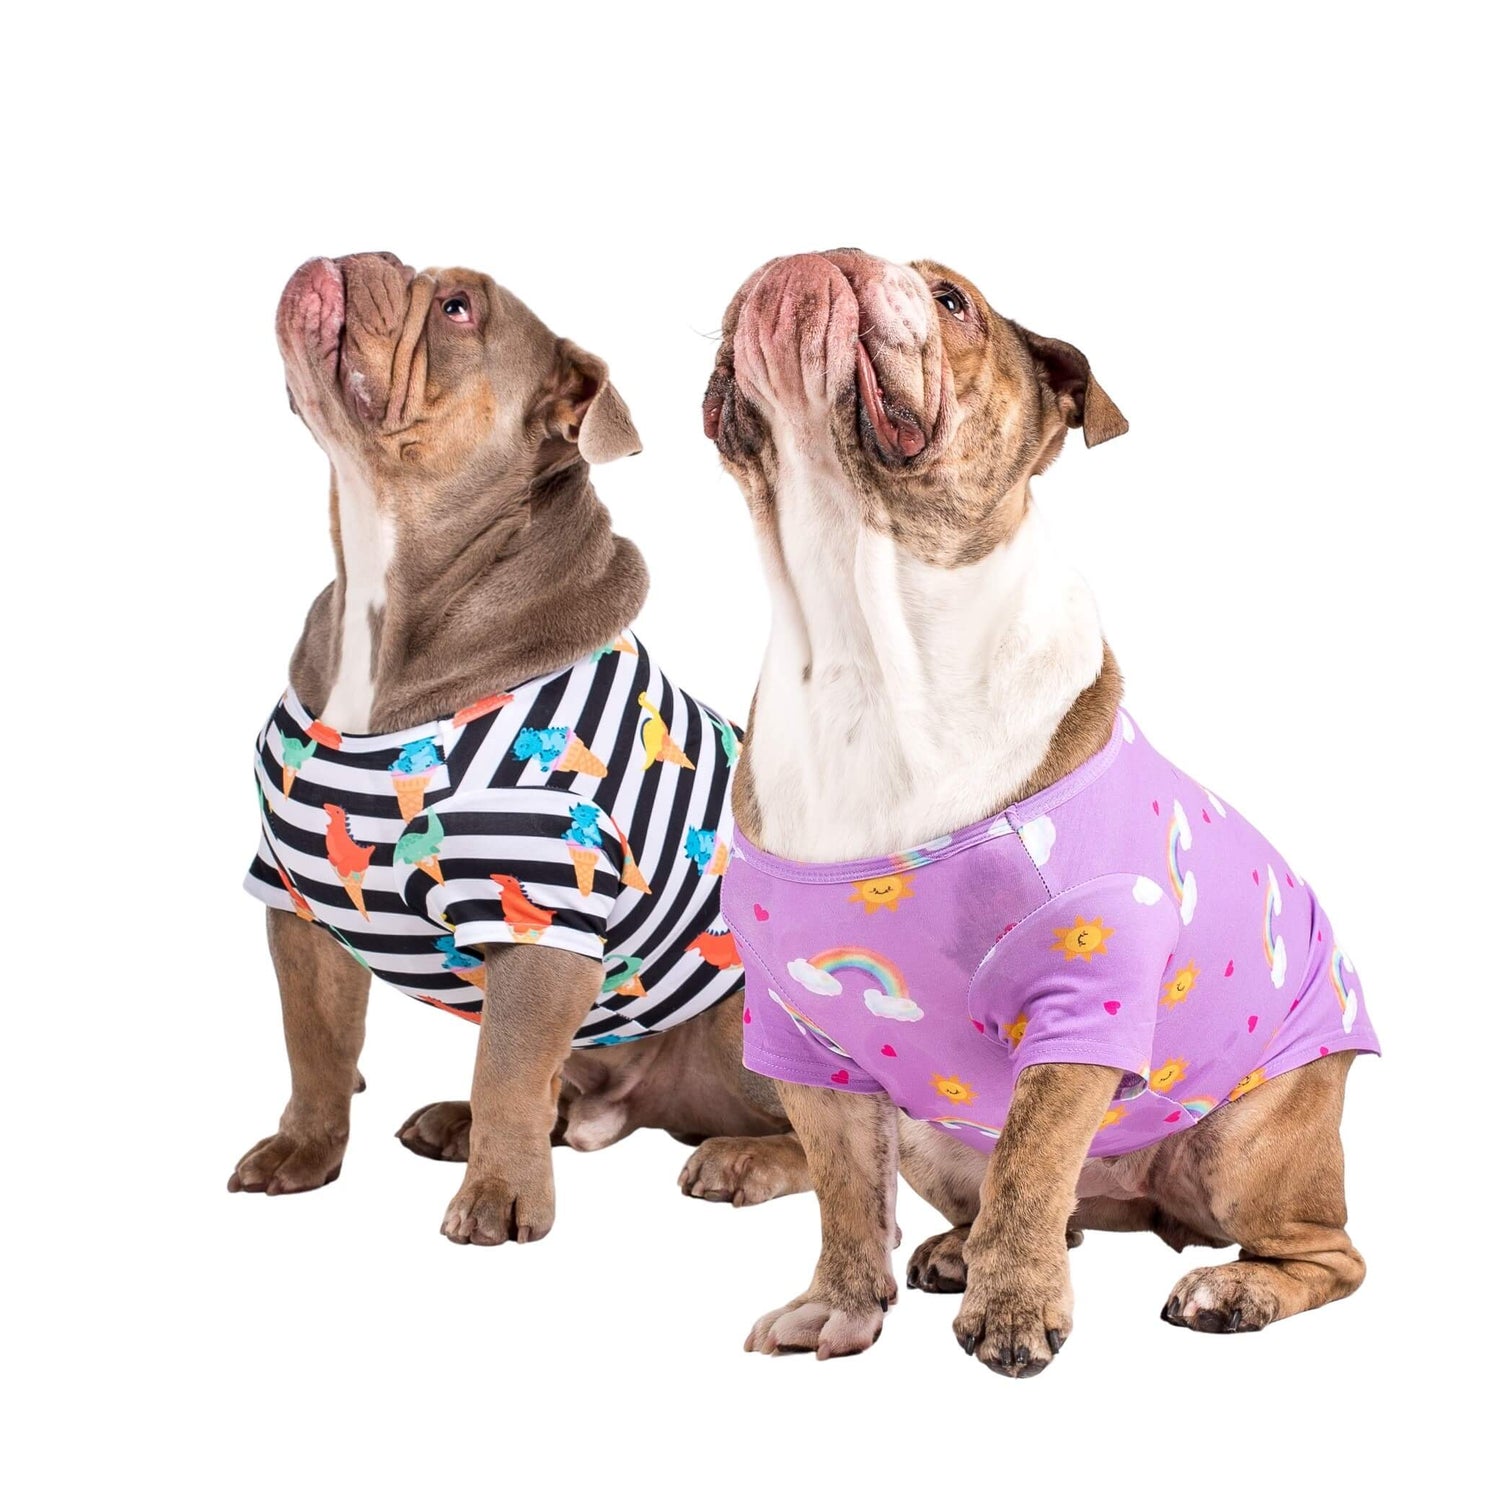 Two English Bulldogs wearing Vibrant Hound's Chasing Rainbow dog pyjama. The dog shirt is purple with rainbows, bright suns, and love hearts printed on it.